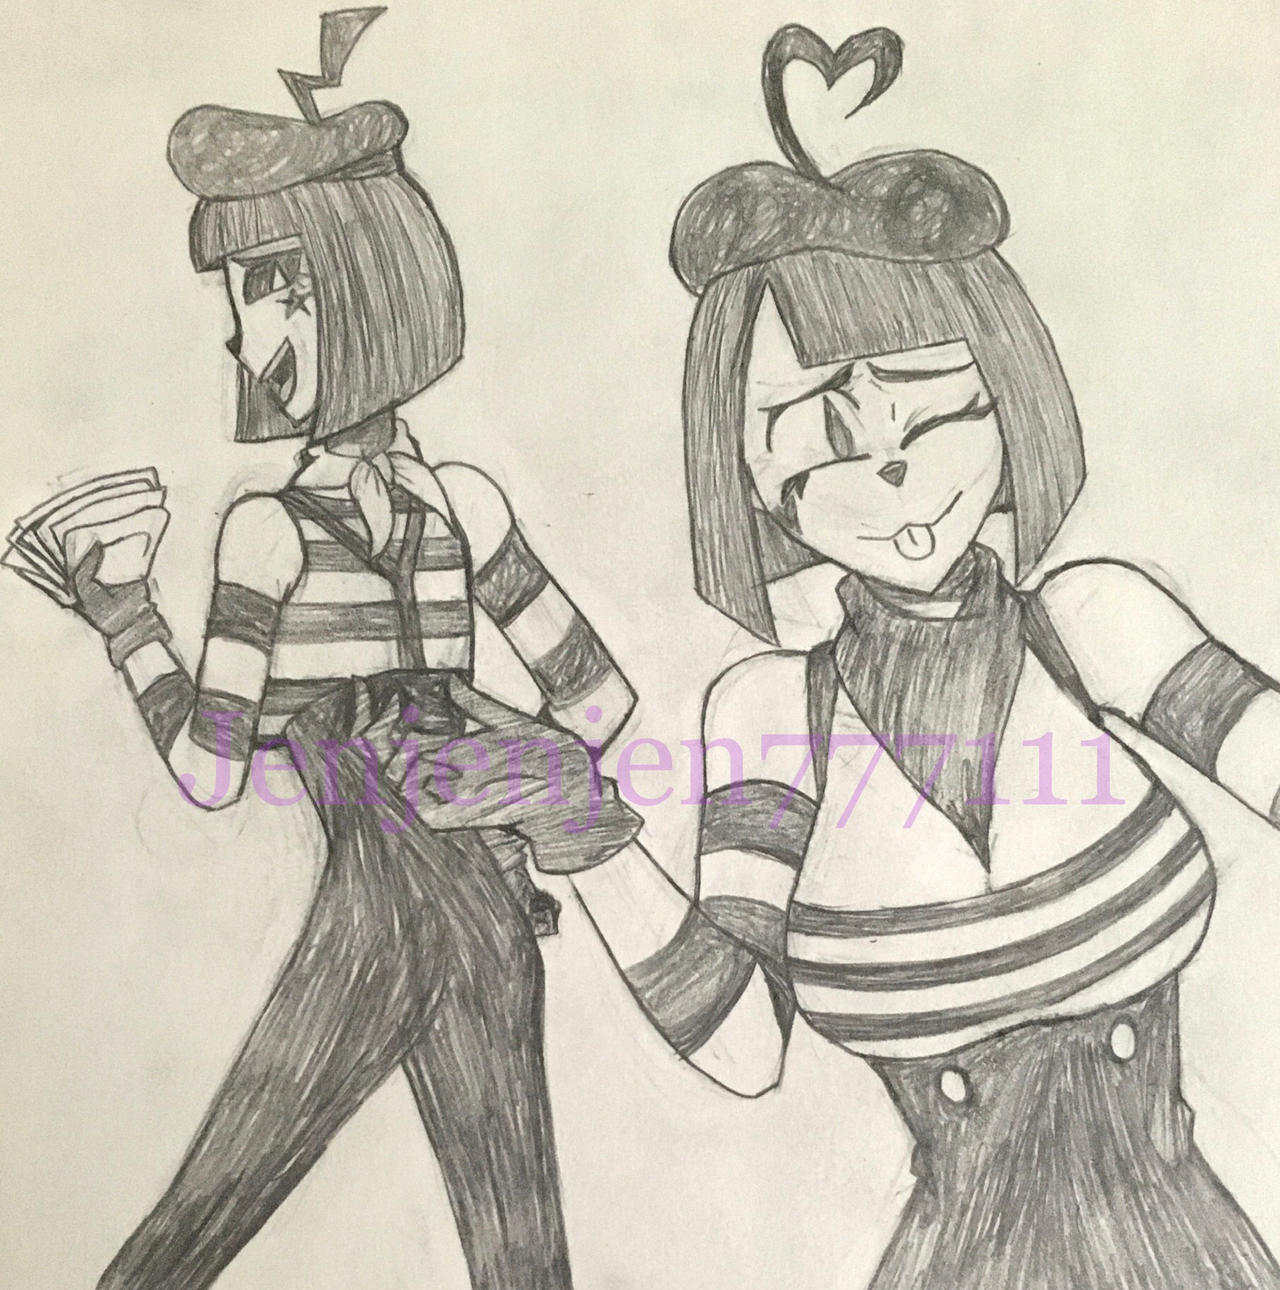 Amergames/artist and more on X: I made this fan art of Bonbon and Chuchu  from the animation MIME AND DASH characters from @derpixon #mimeanddash  #bonbon #chuchu #fanart  / X